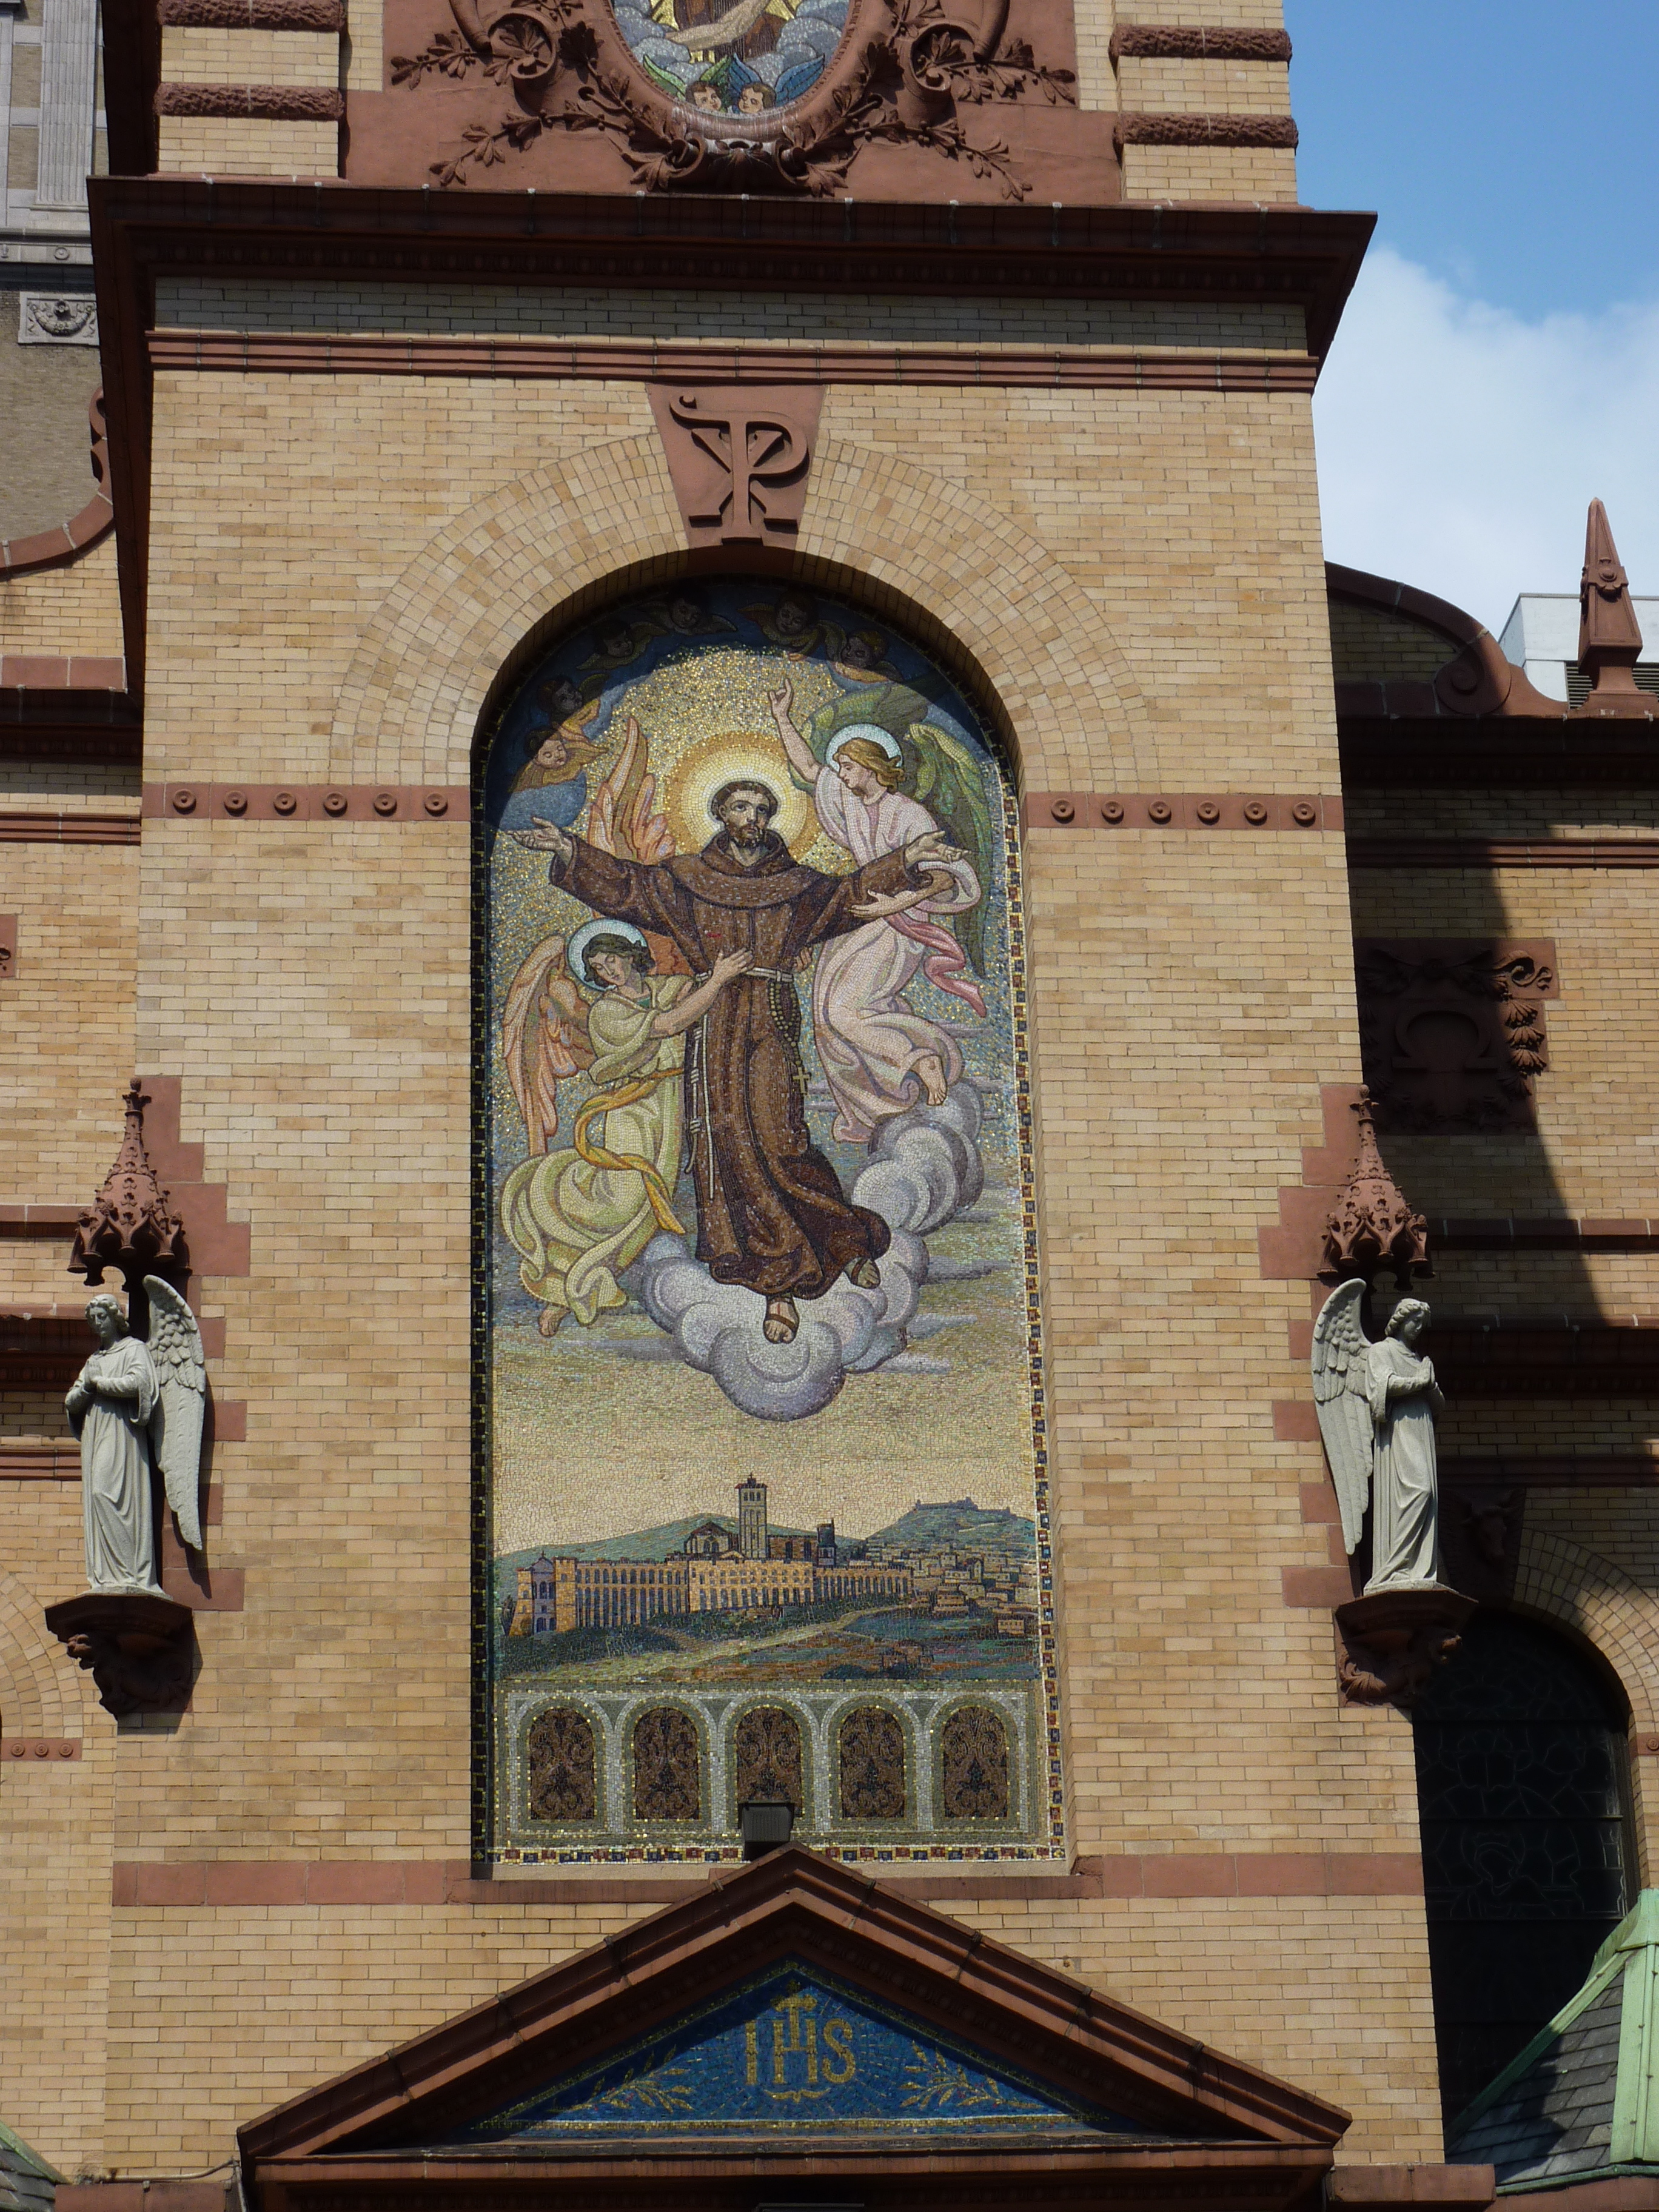 Saint Francis of Assisi Church on West 31st Street, New York, NY